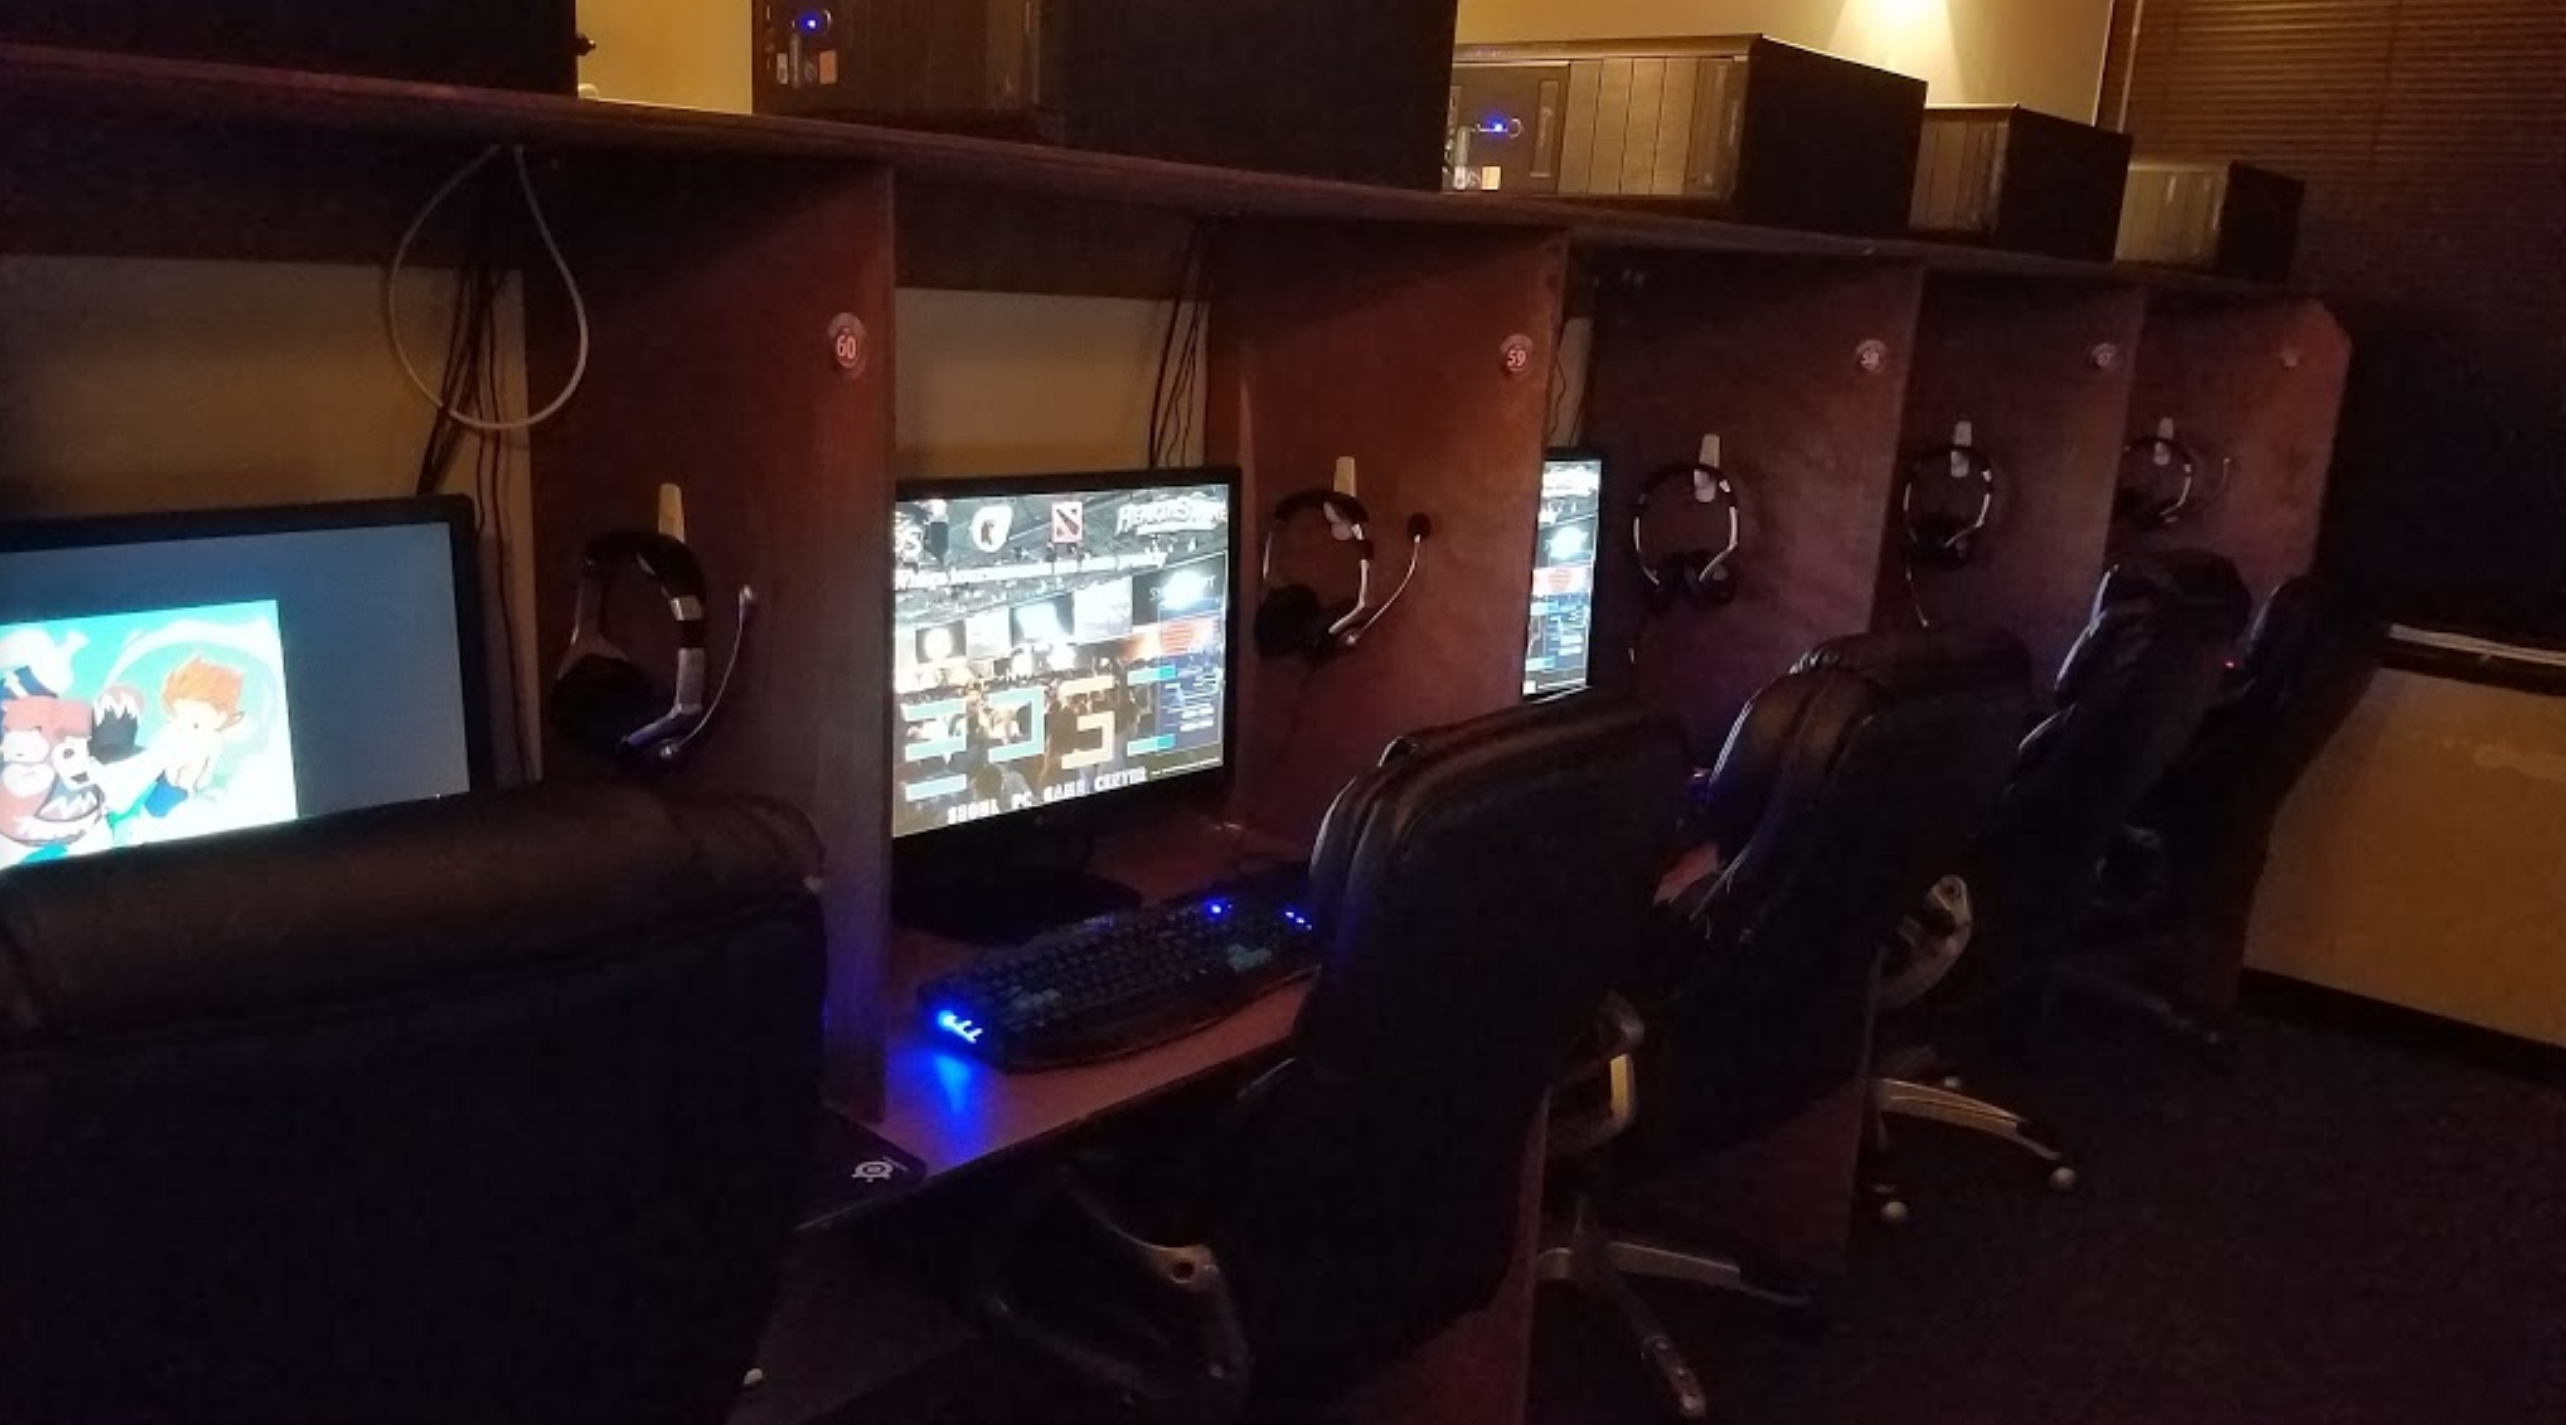 Seoul Pc Game Center in Annandale, VA | Whitepages